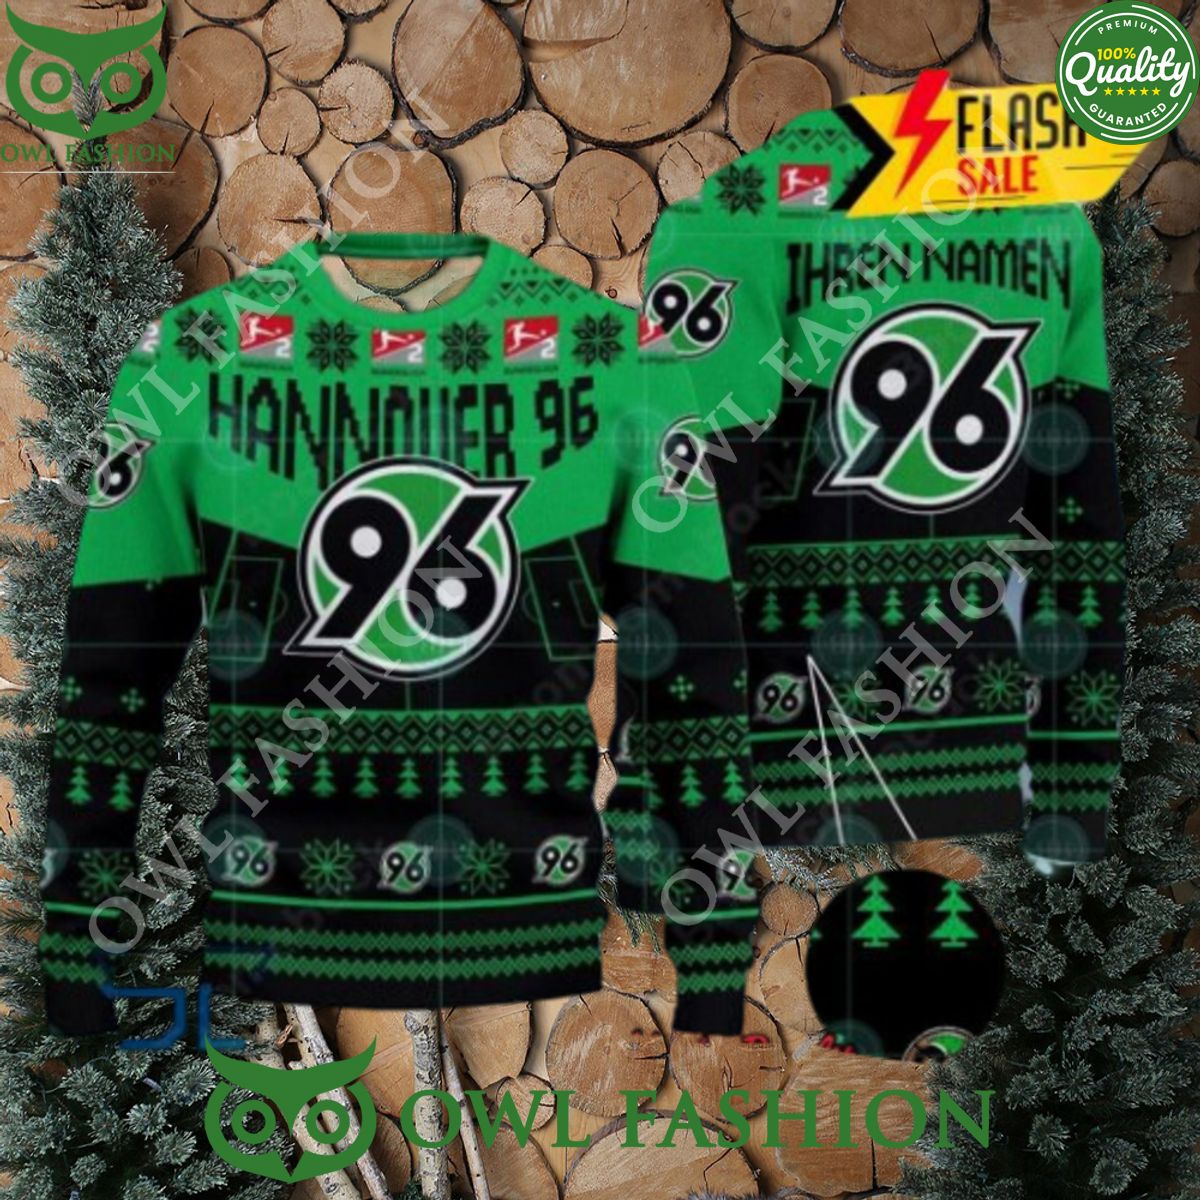 Personalized Name Hannover 96 Stadium Ugly Christmas Sweater